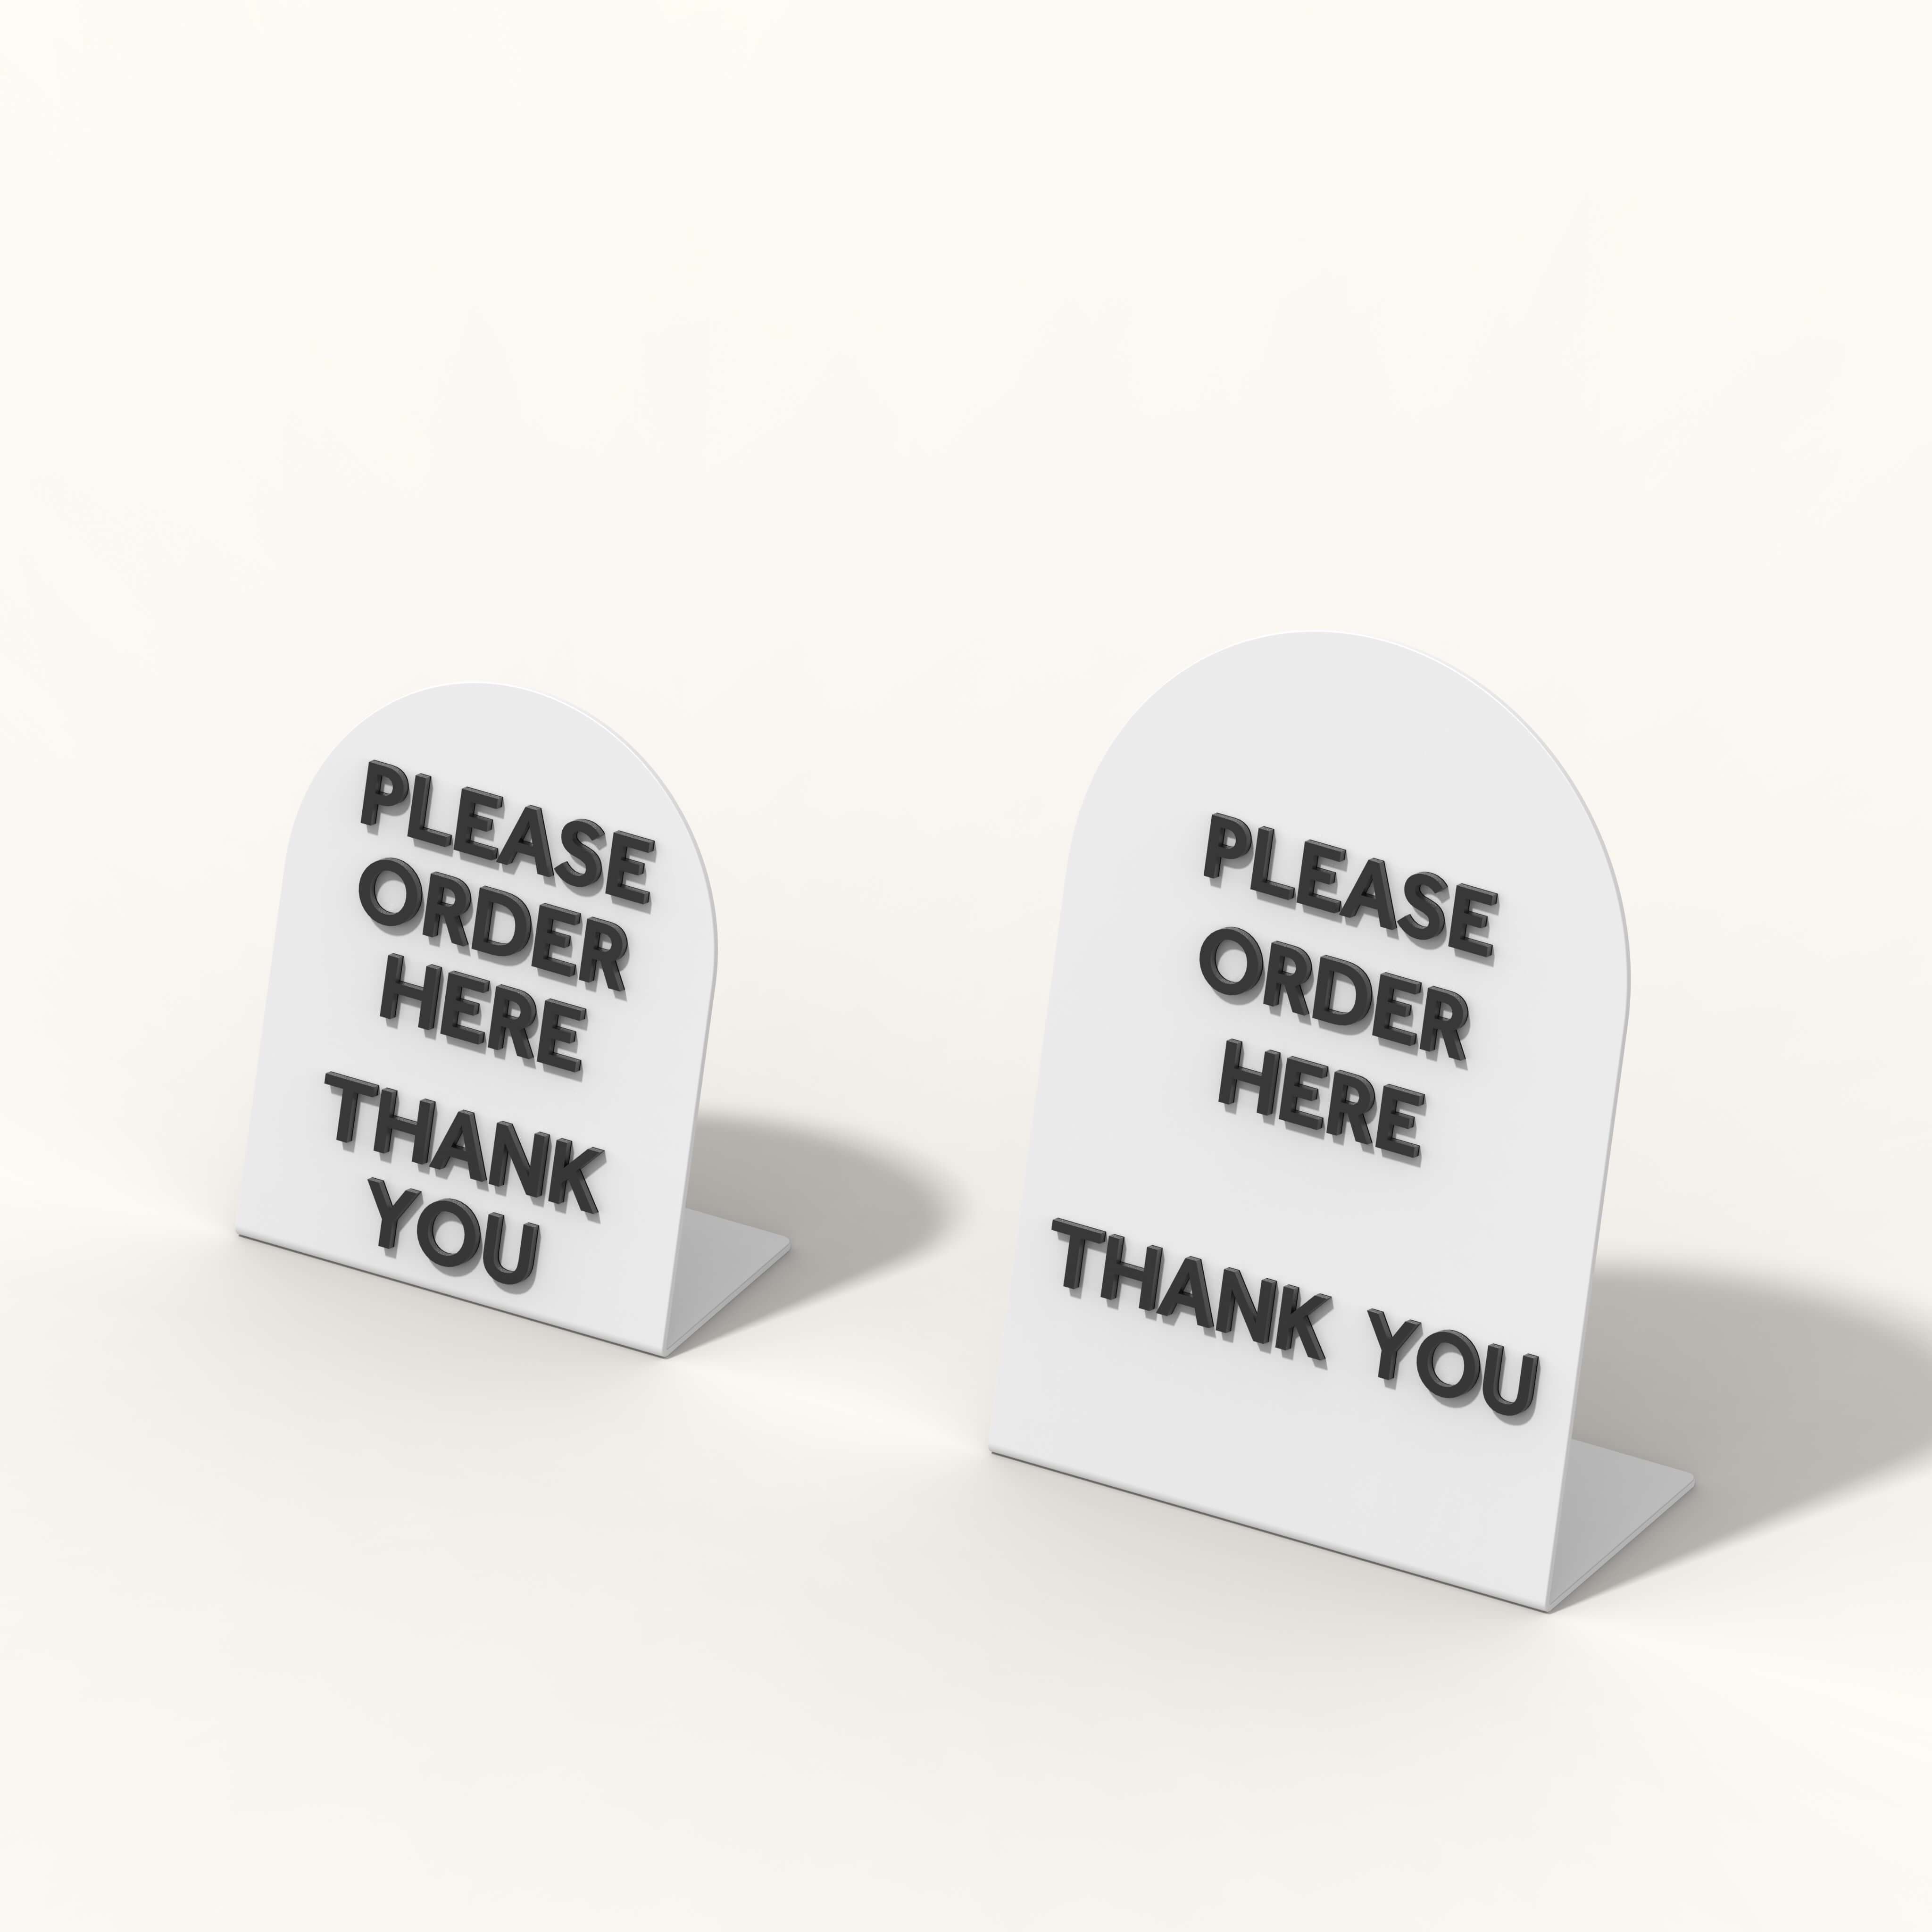 Magnet Signs, custom counter signs, counter sign display, pricing signs, cabinet signs